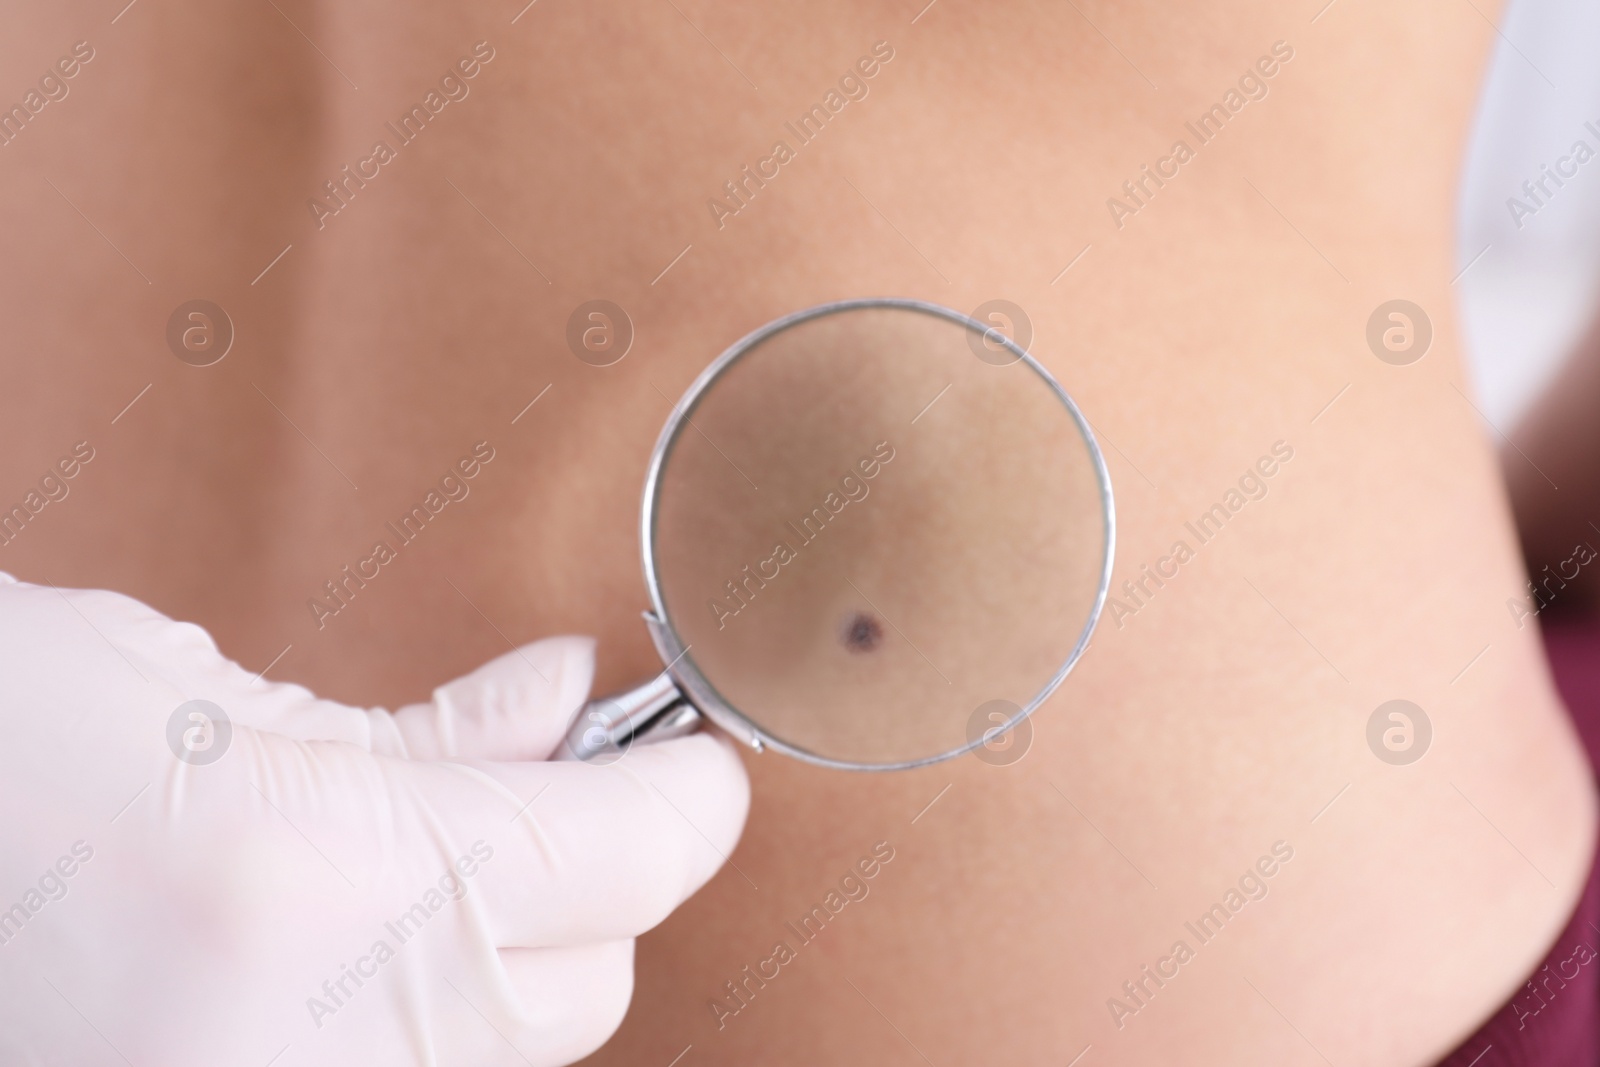 Photo of Dermatologist examining patient with magnifying glass in clinic, closeup view